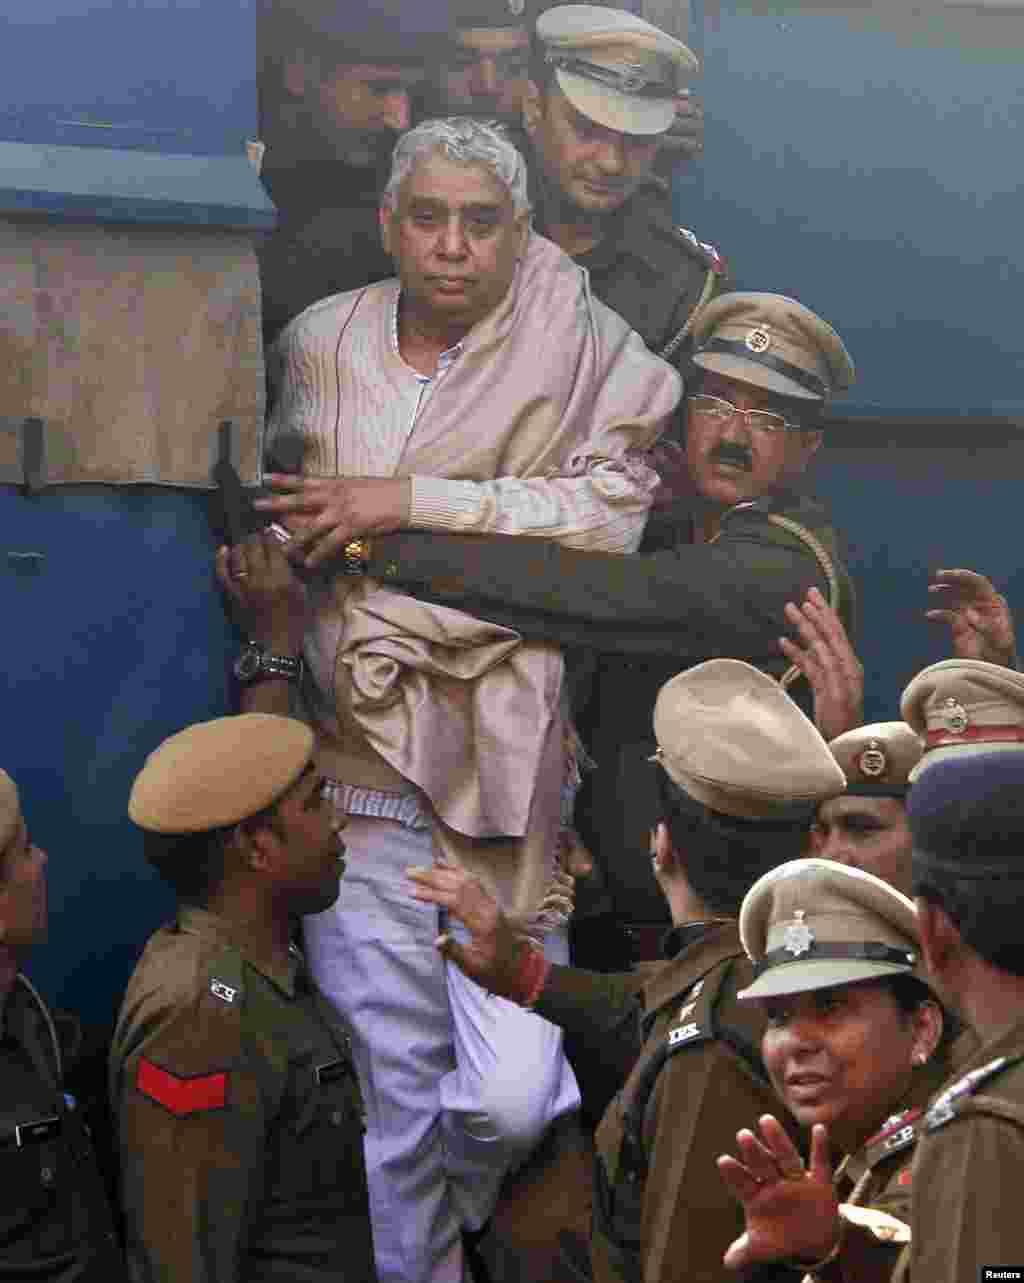 Satguru Rampalji Maharaj, a self-styled &quot;godman&quot; is escorted to the high court after his arrest, in the northern Indian city of Chandigarh. A self-styled Indian religious leader was charged with sedition and waging war against the state after a days-long siege of his sprawling compound ended in his arrest along with 450 hardcore followers.